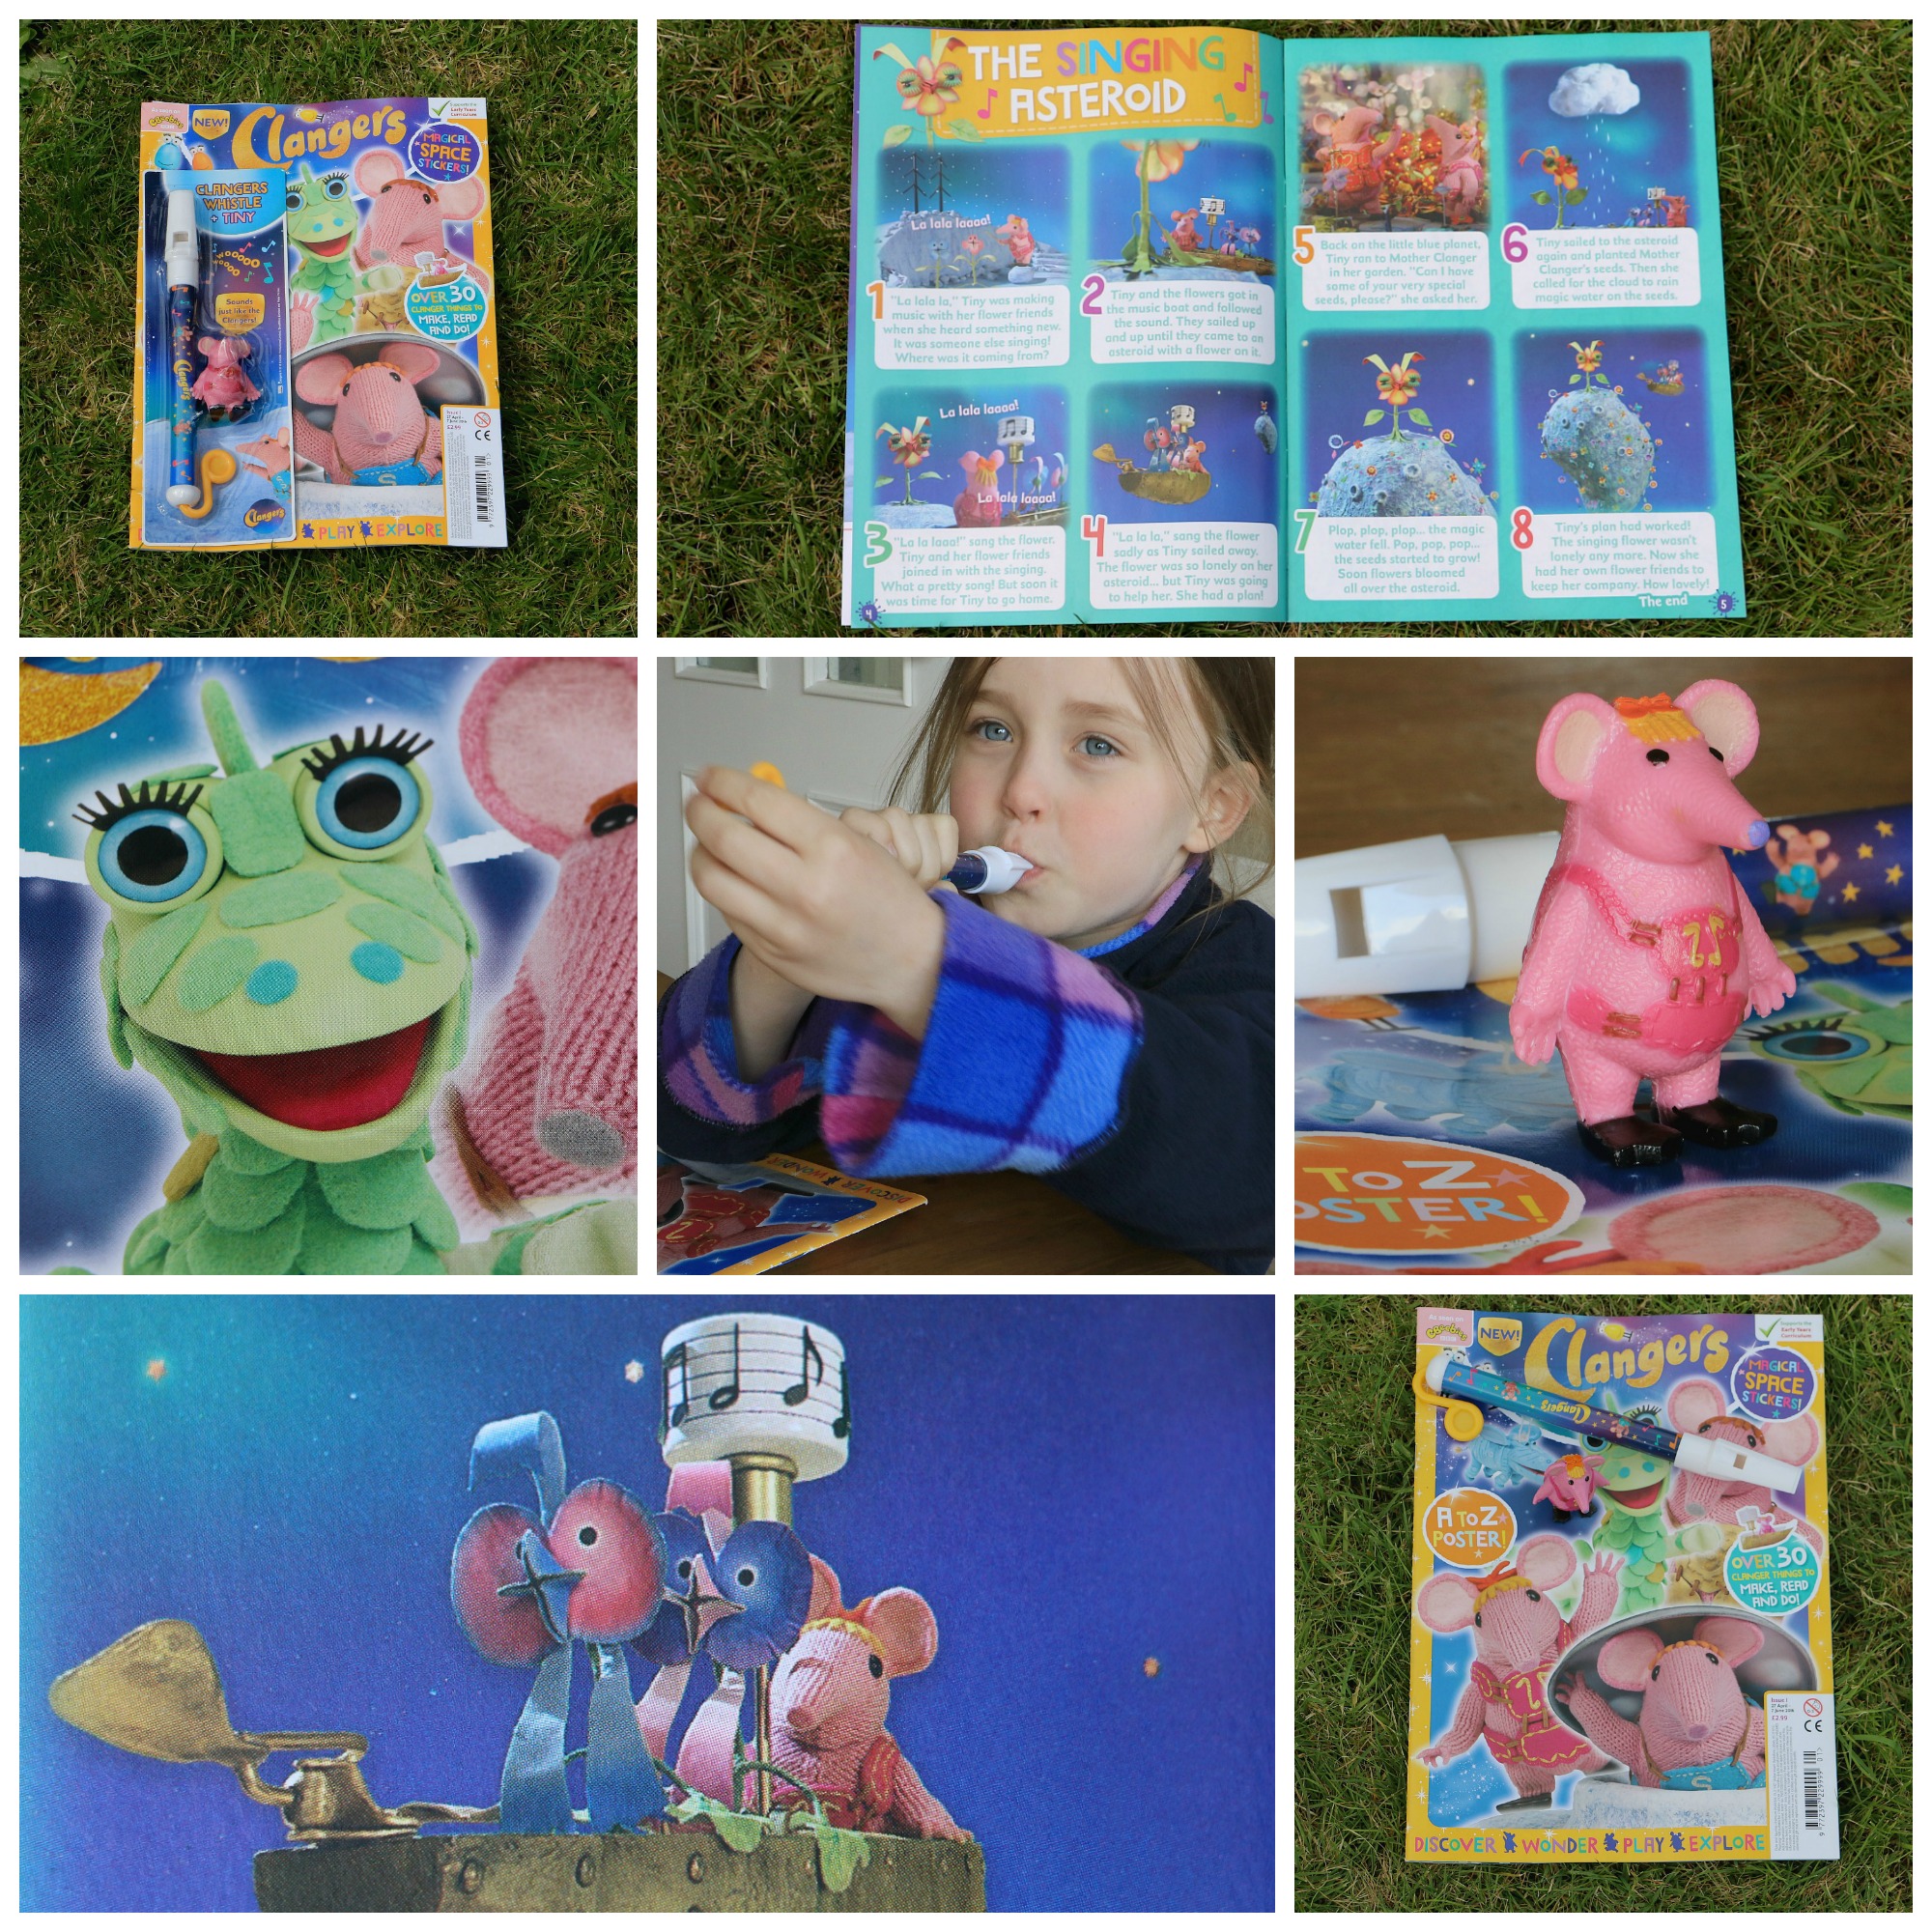 PODcast Clangers collage